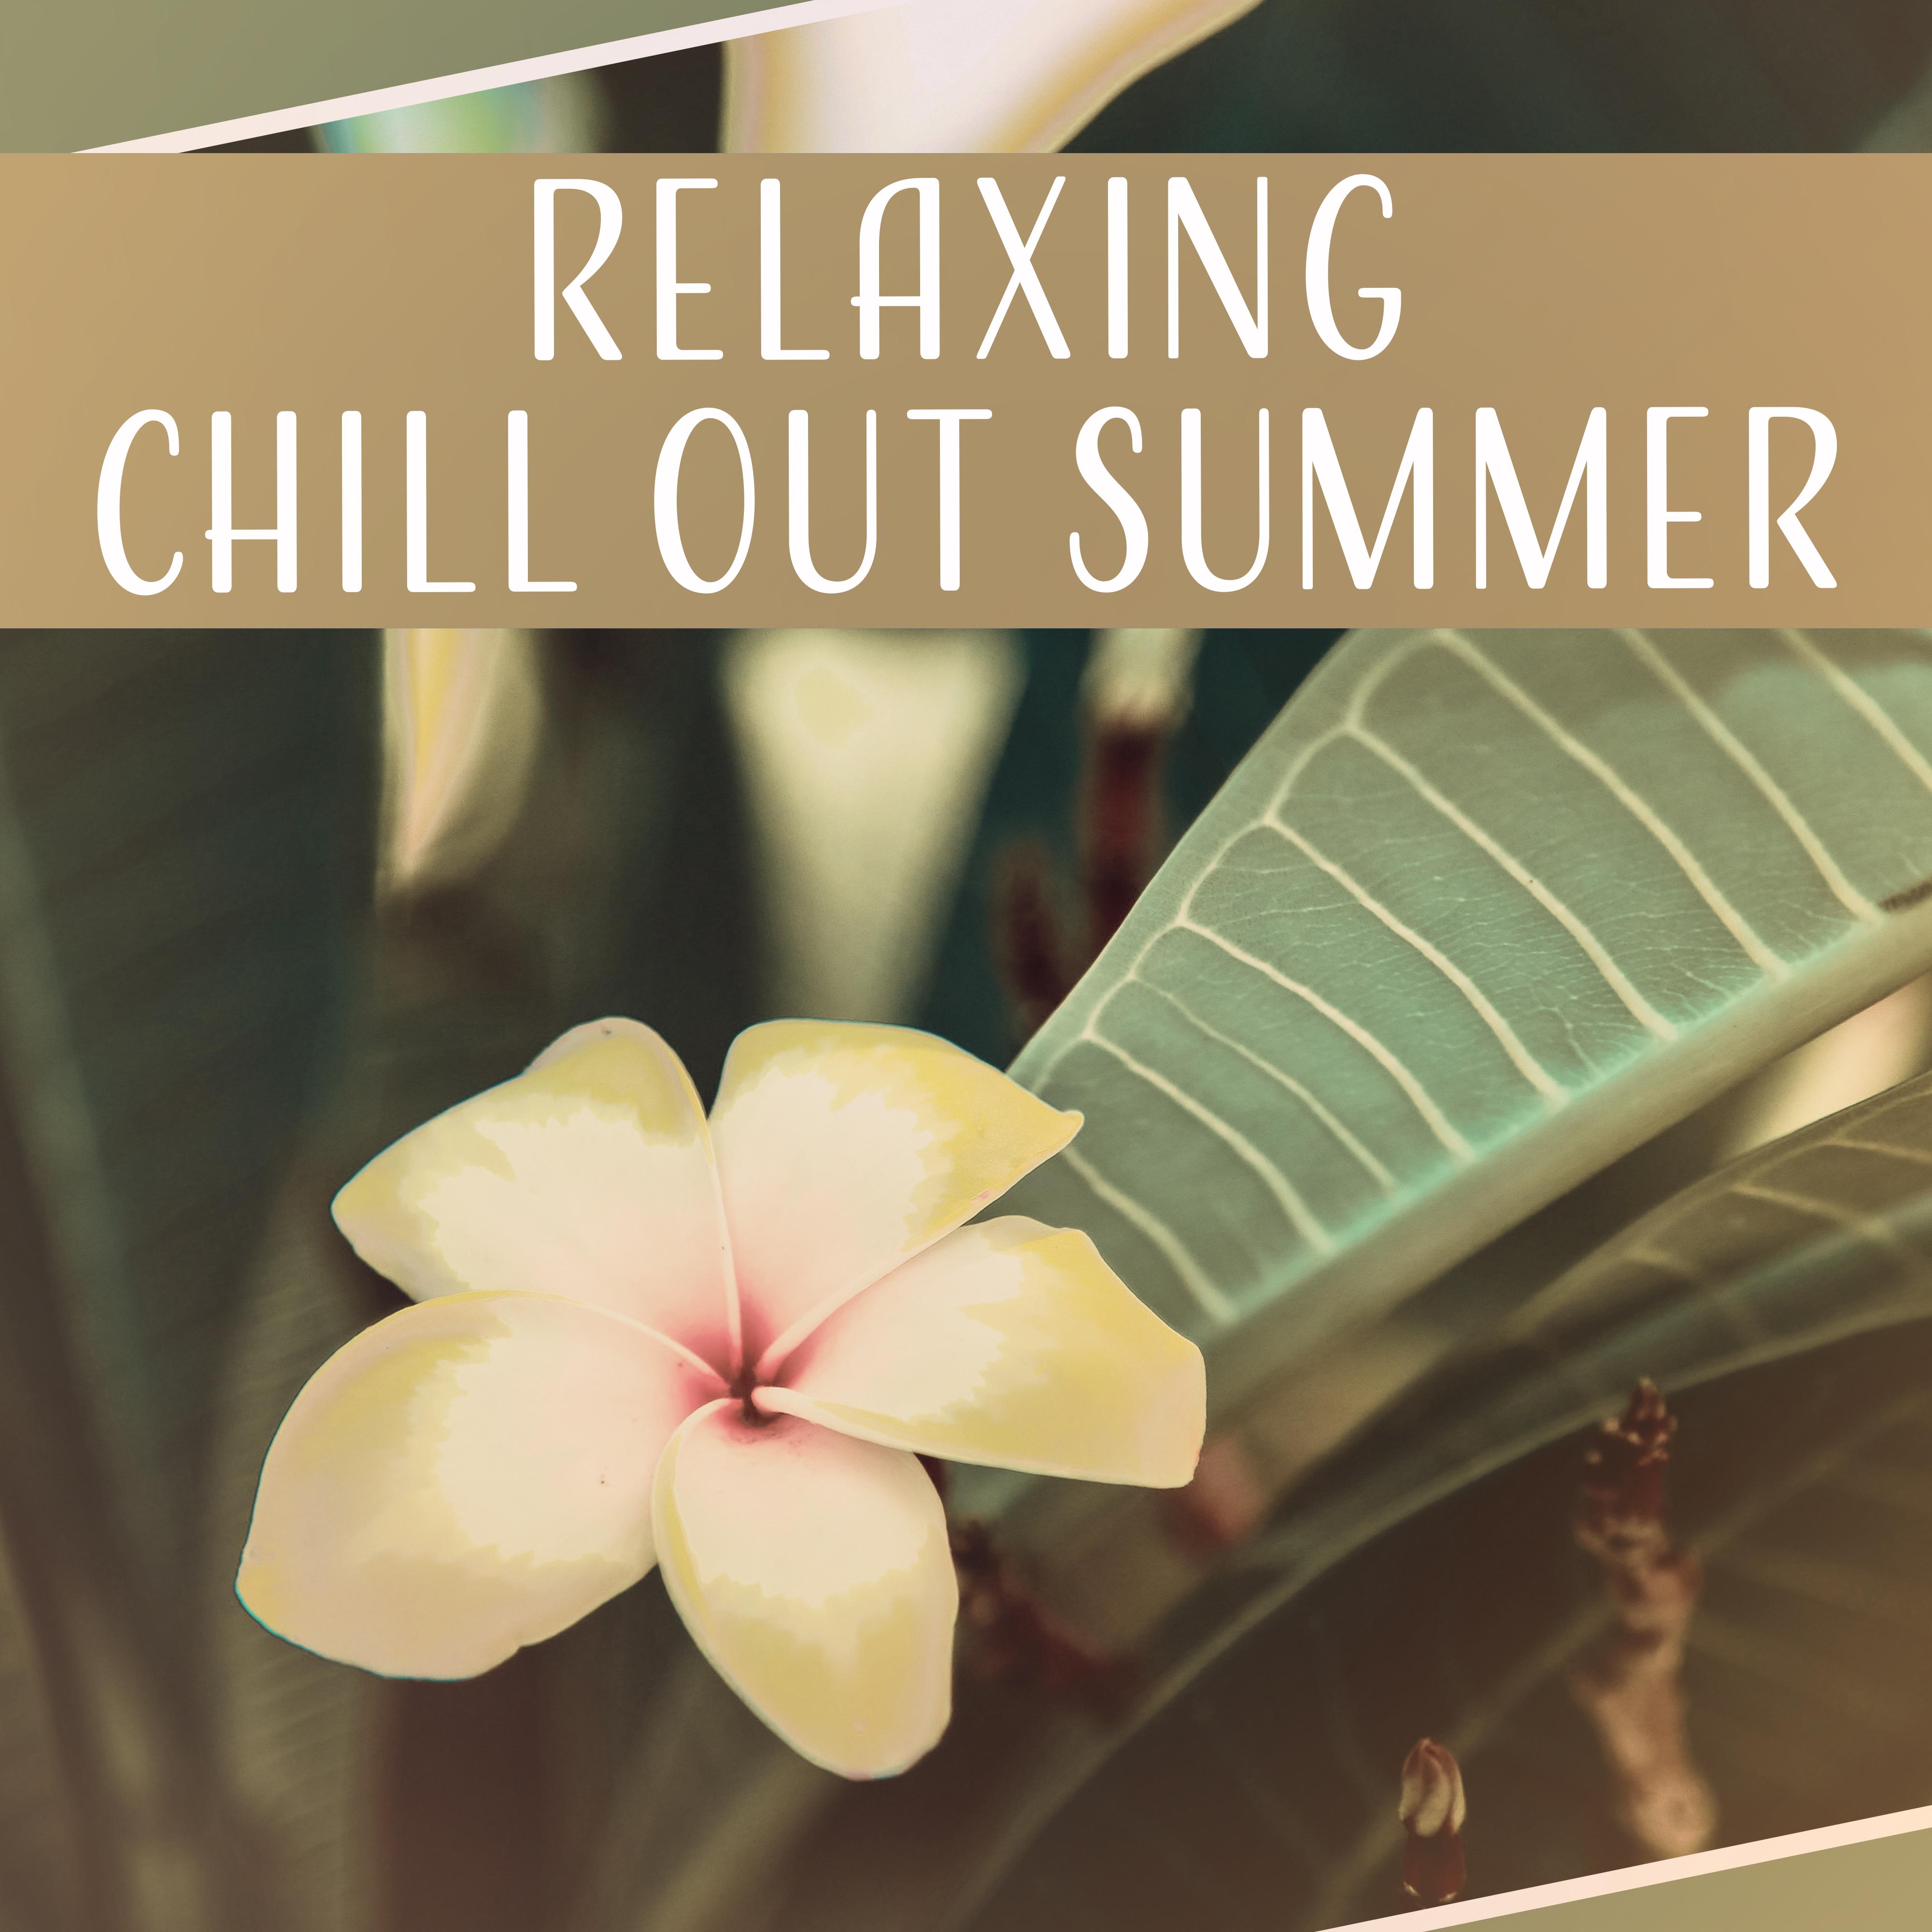 Relaxing Chill Out Summer – Inner Relaxation, Summertime Music, Chill Out Lounge, Rest on the Island, Tropical Sounds